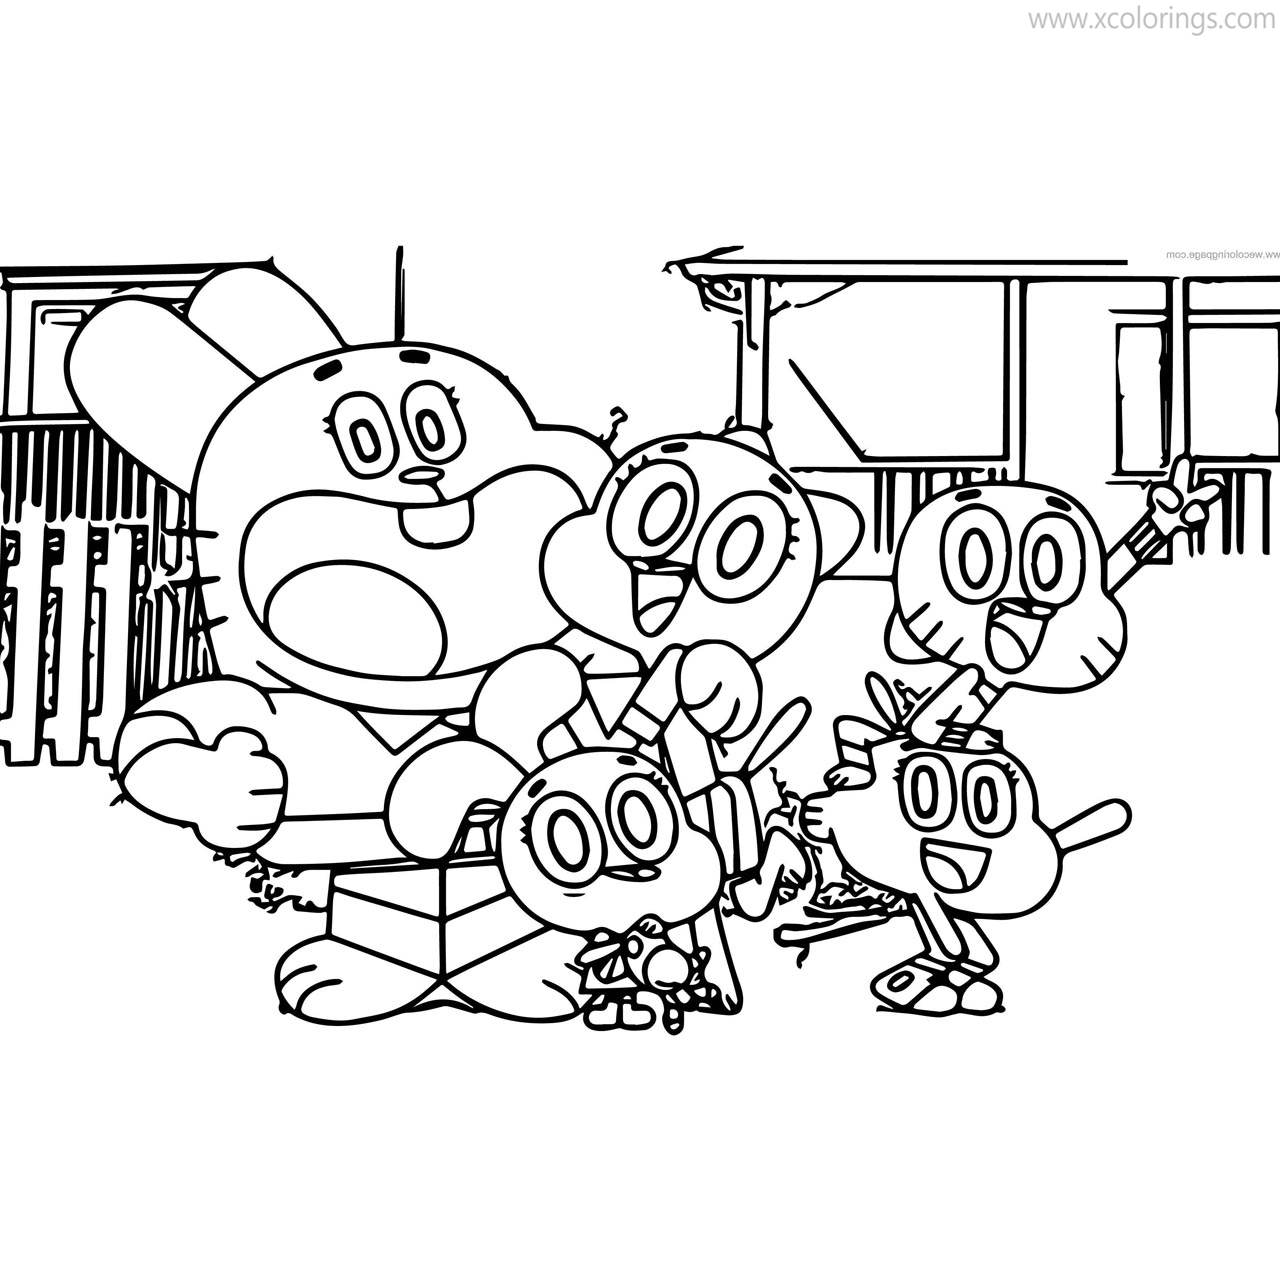 Free The Amazing World of Gumball Coloring Pages Characters printable